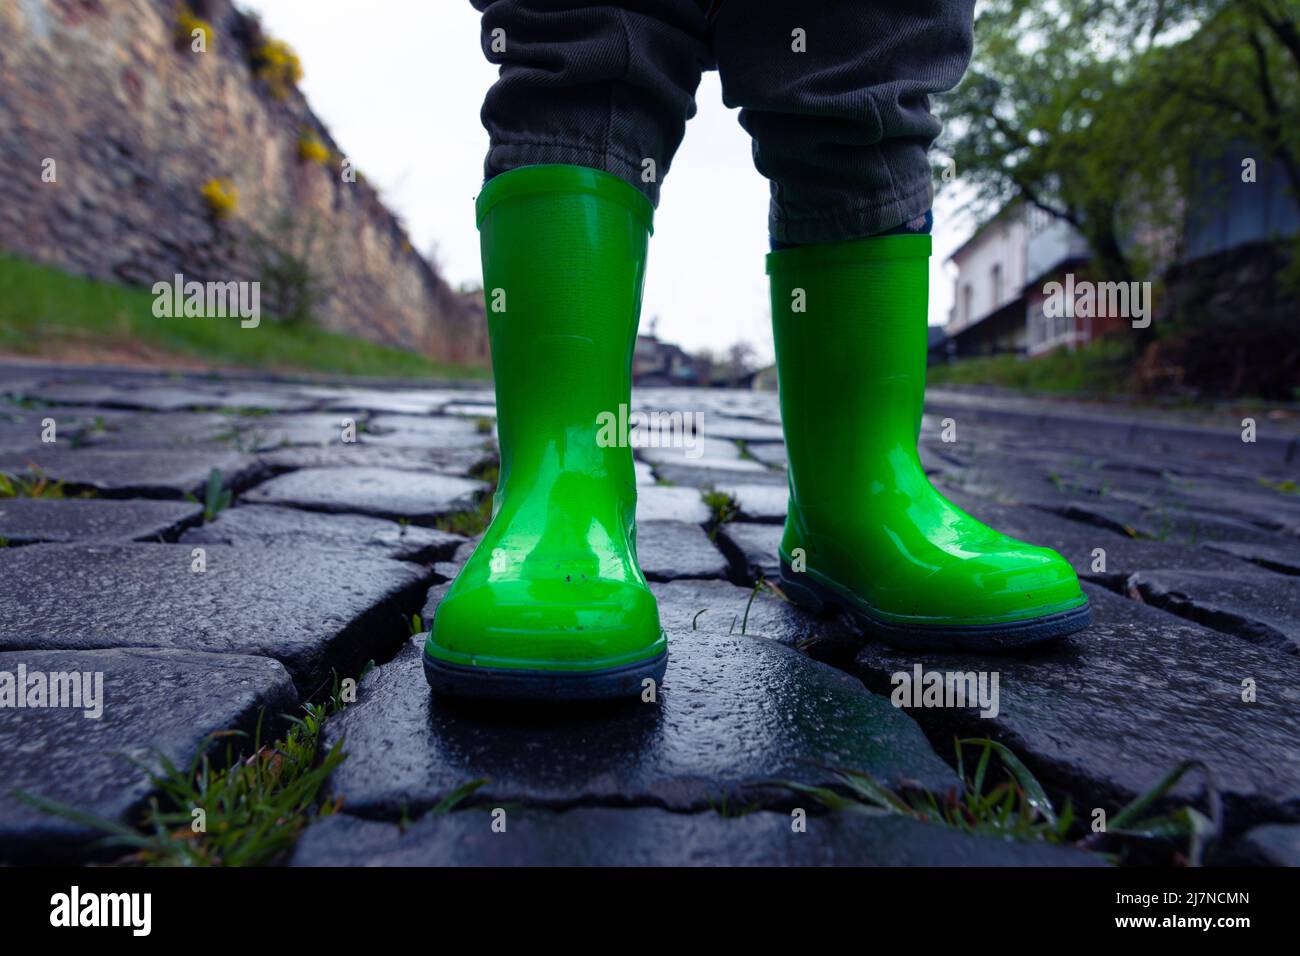 A small child in green rubber boots stands on a paved road. Photo of a child's feet in rubber shoes on the pavement after rain. Stock Photo